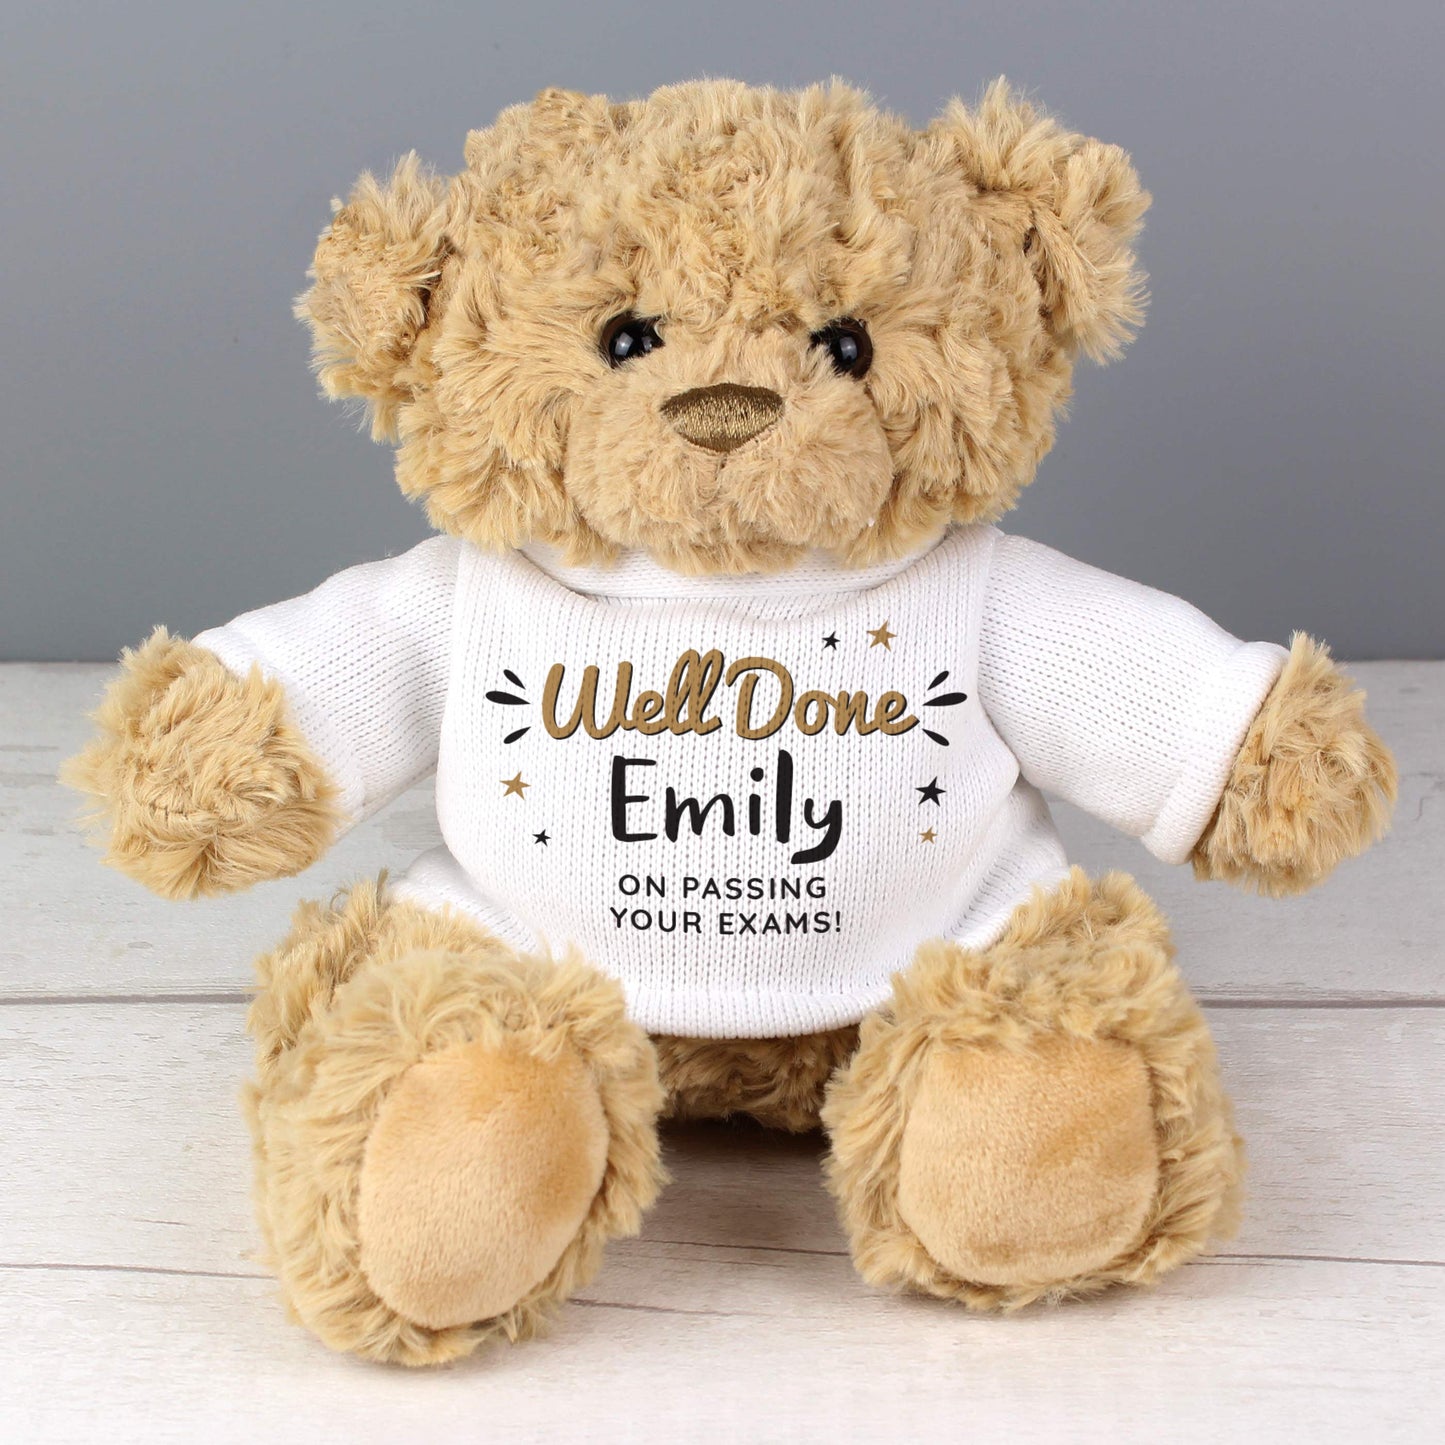 WELL DONE ON PASSING YOUR EXAMS TEDDY BEAR PLUSH from Eleanoras